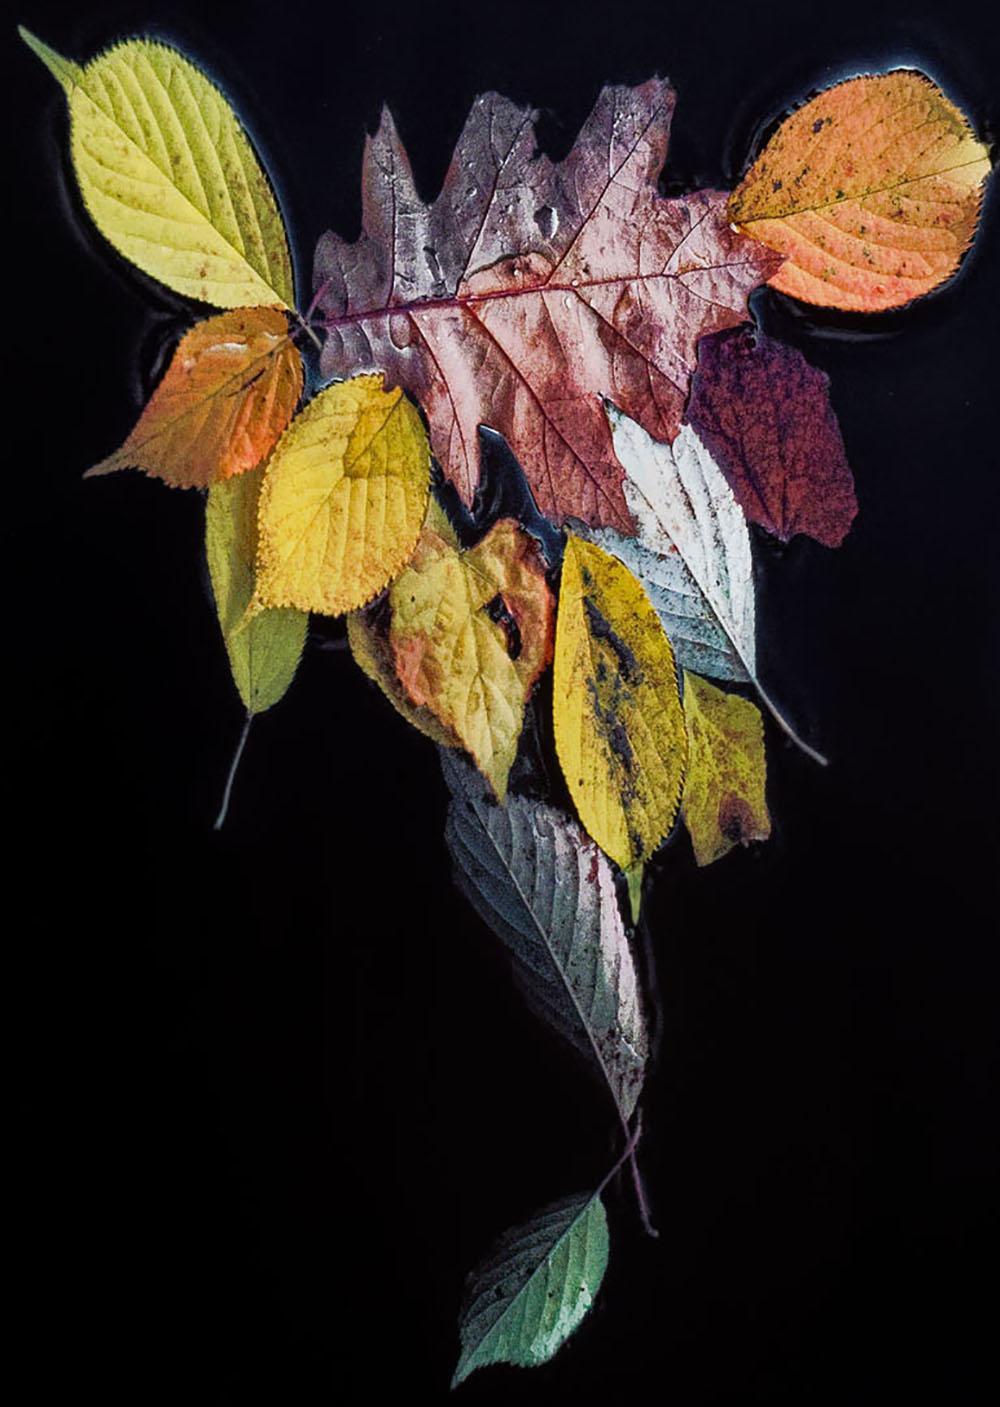 Dance of Nature, 2020 by Hank Gans is a contemporary color archival pigment print in an edition of 5. The photograph focuses on design shapes created spontaneously in nature - fallen leaves from trees swept by a river form a harmonious pattern, an